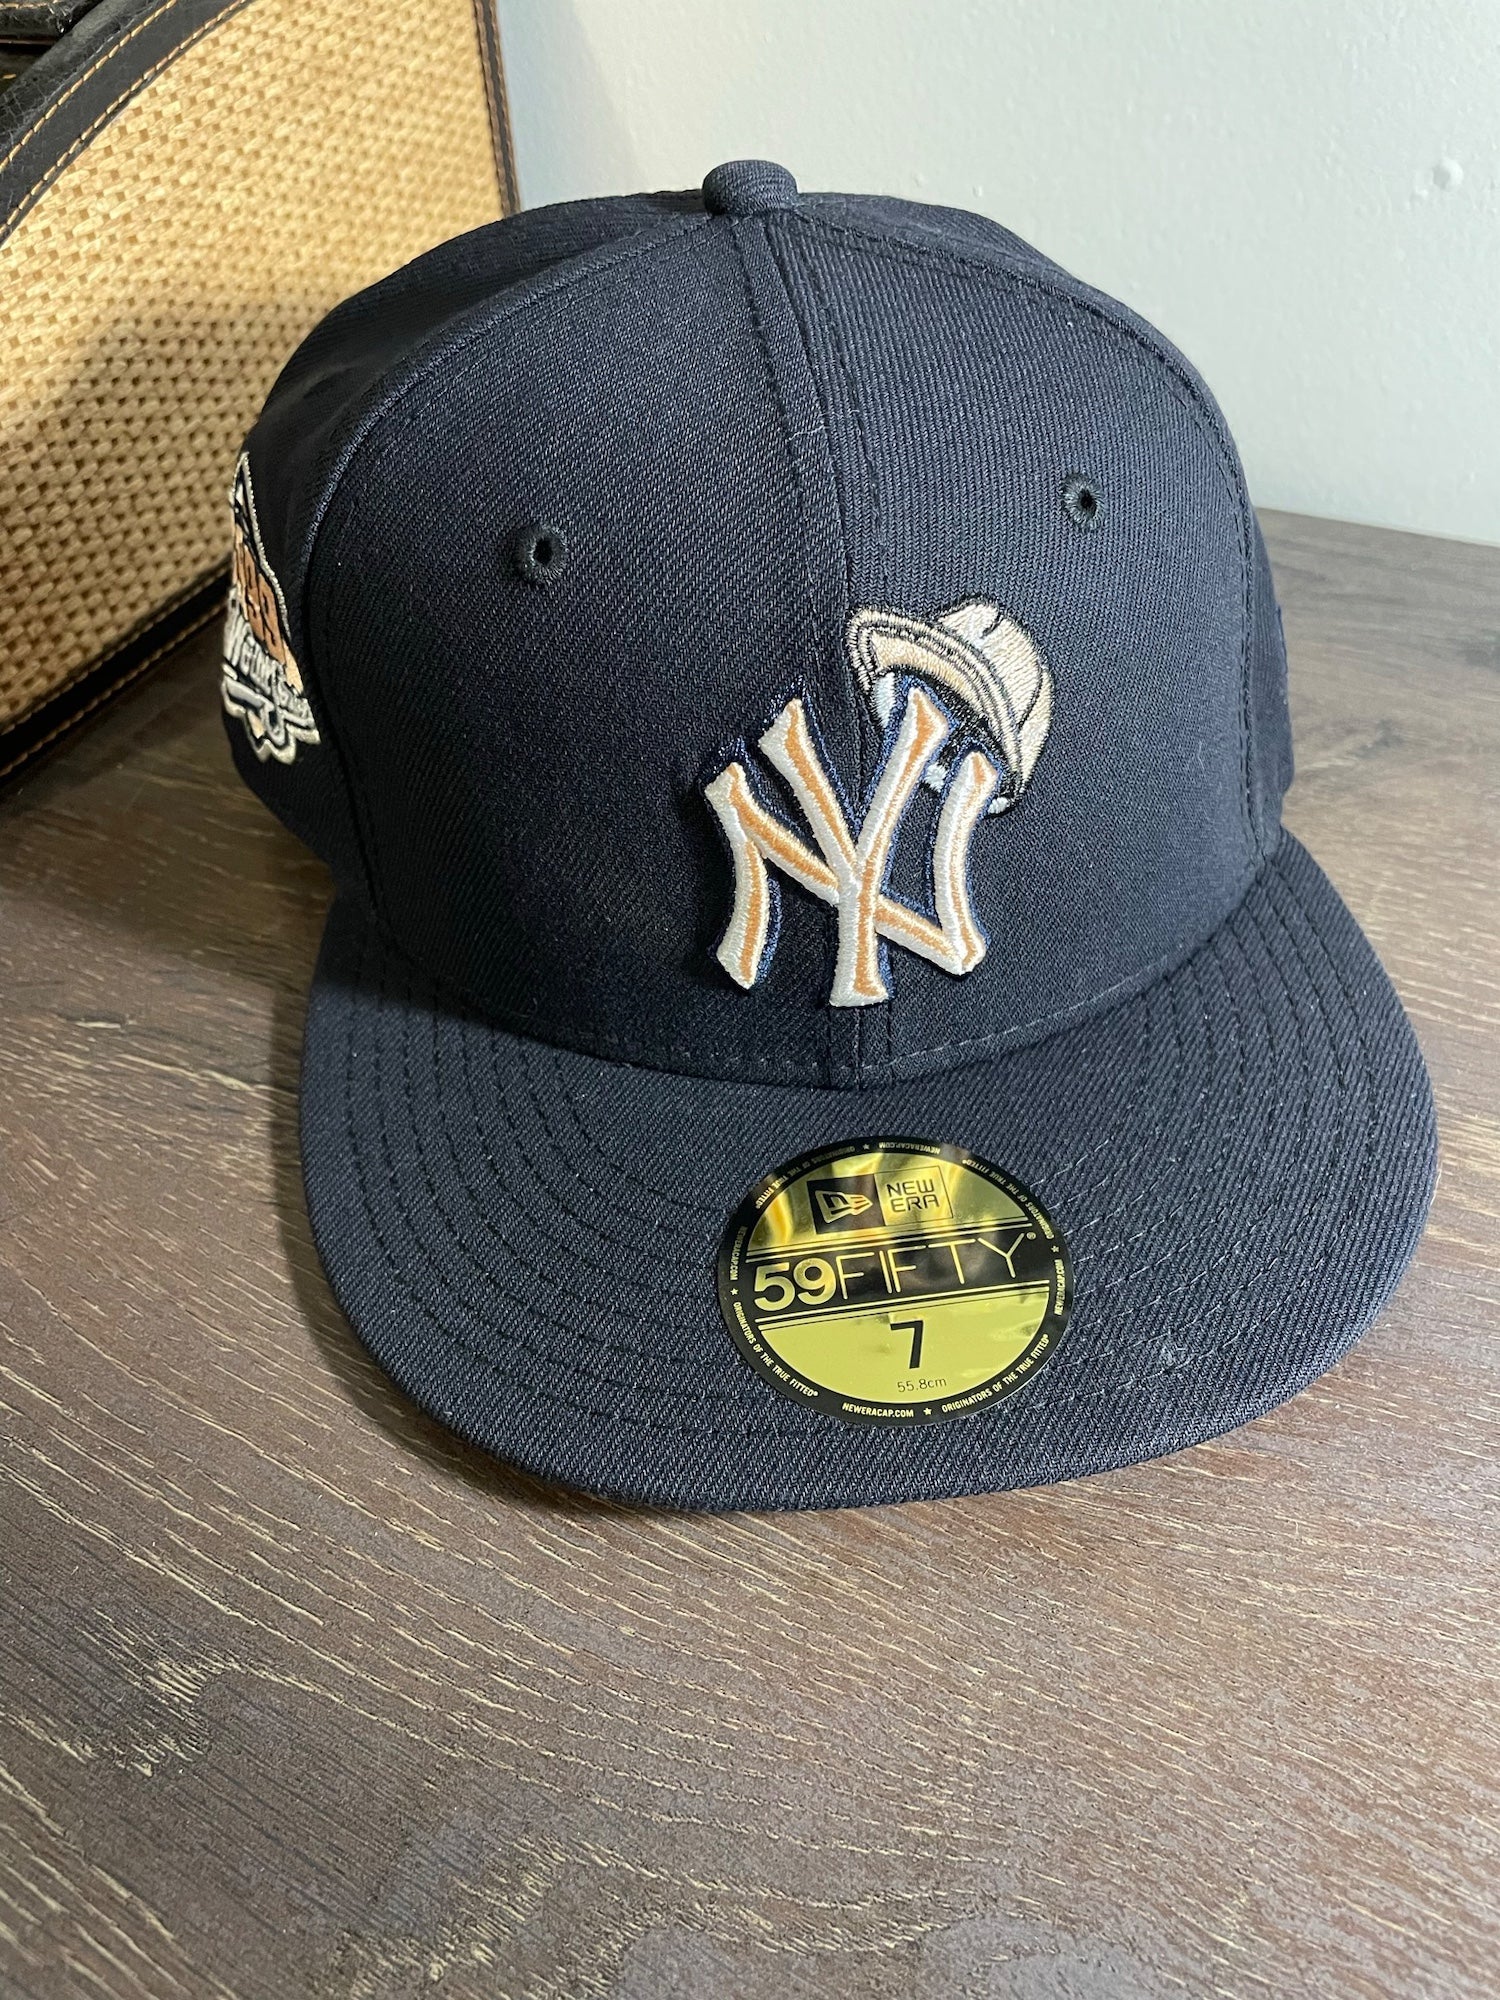 Official 2016 MLB All Star Game New York Yankees New Era Fitted Hat 7 3/8